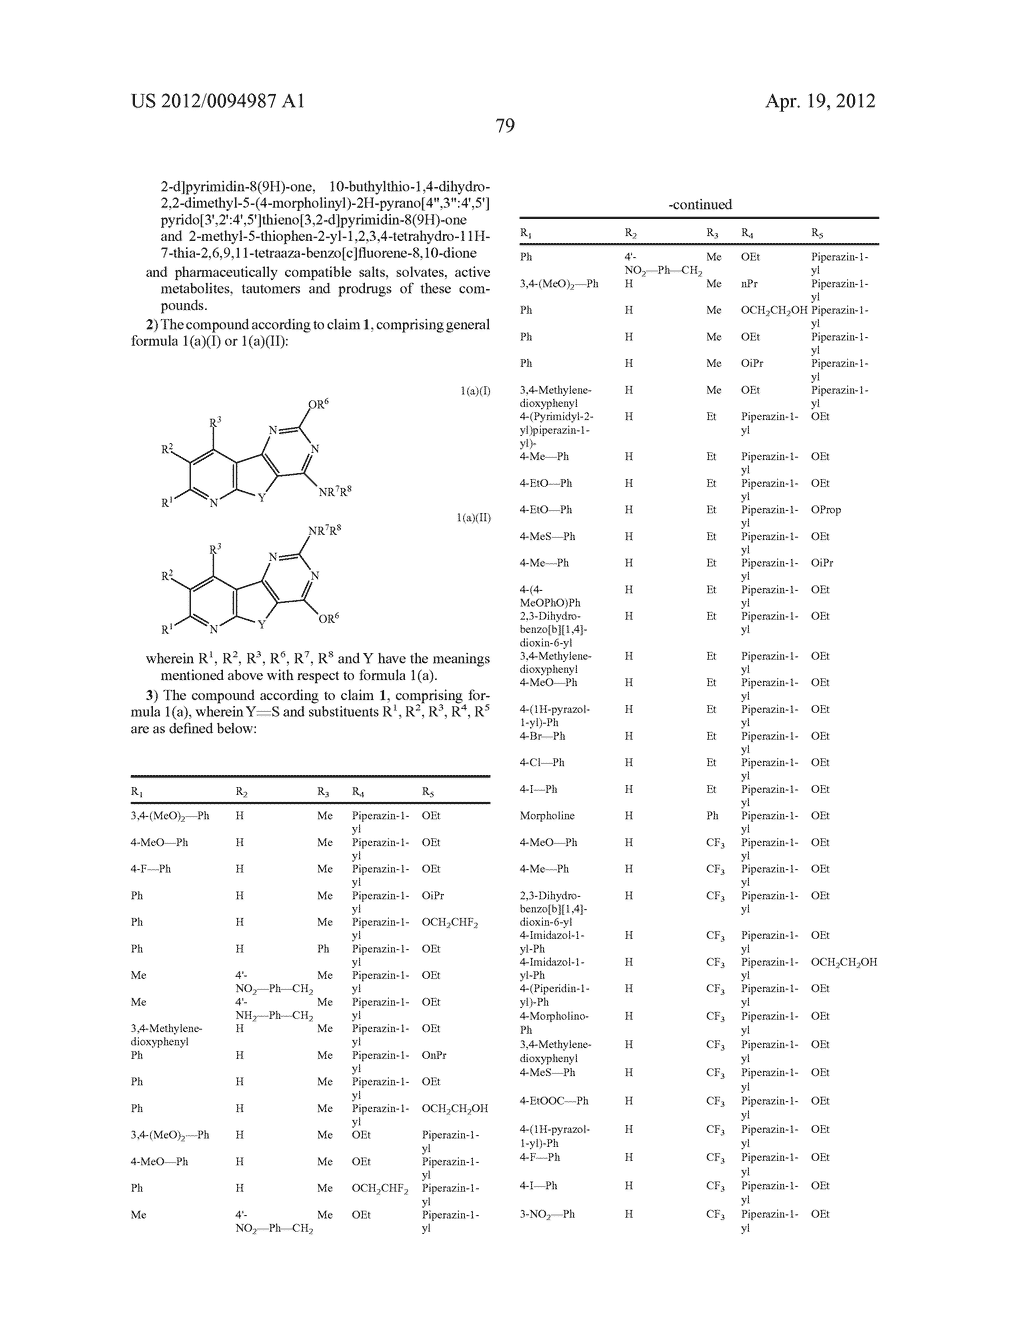 SUBSTITUTED PYRIDO [3', 2': 4, 5] THIENO [3, 2-D] PYRIMIDINES AND PYRIDO     [3', 2': 4, 5] FURO [3, 2-D] PYRIMIDINES USED AS INHIBITORS OF THE PDE-4     AND/OR THE RELEASE OF TNF-alpha - diagram, schematic, and image 81